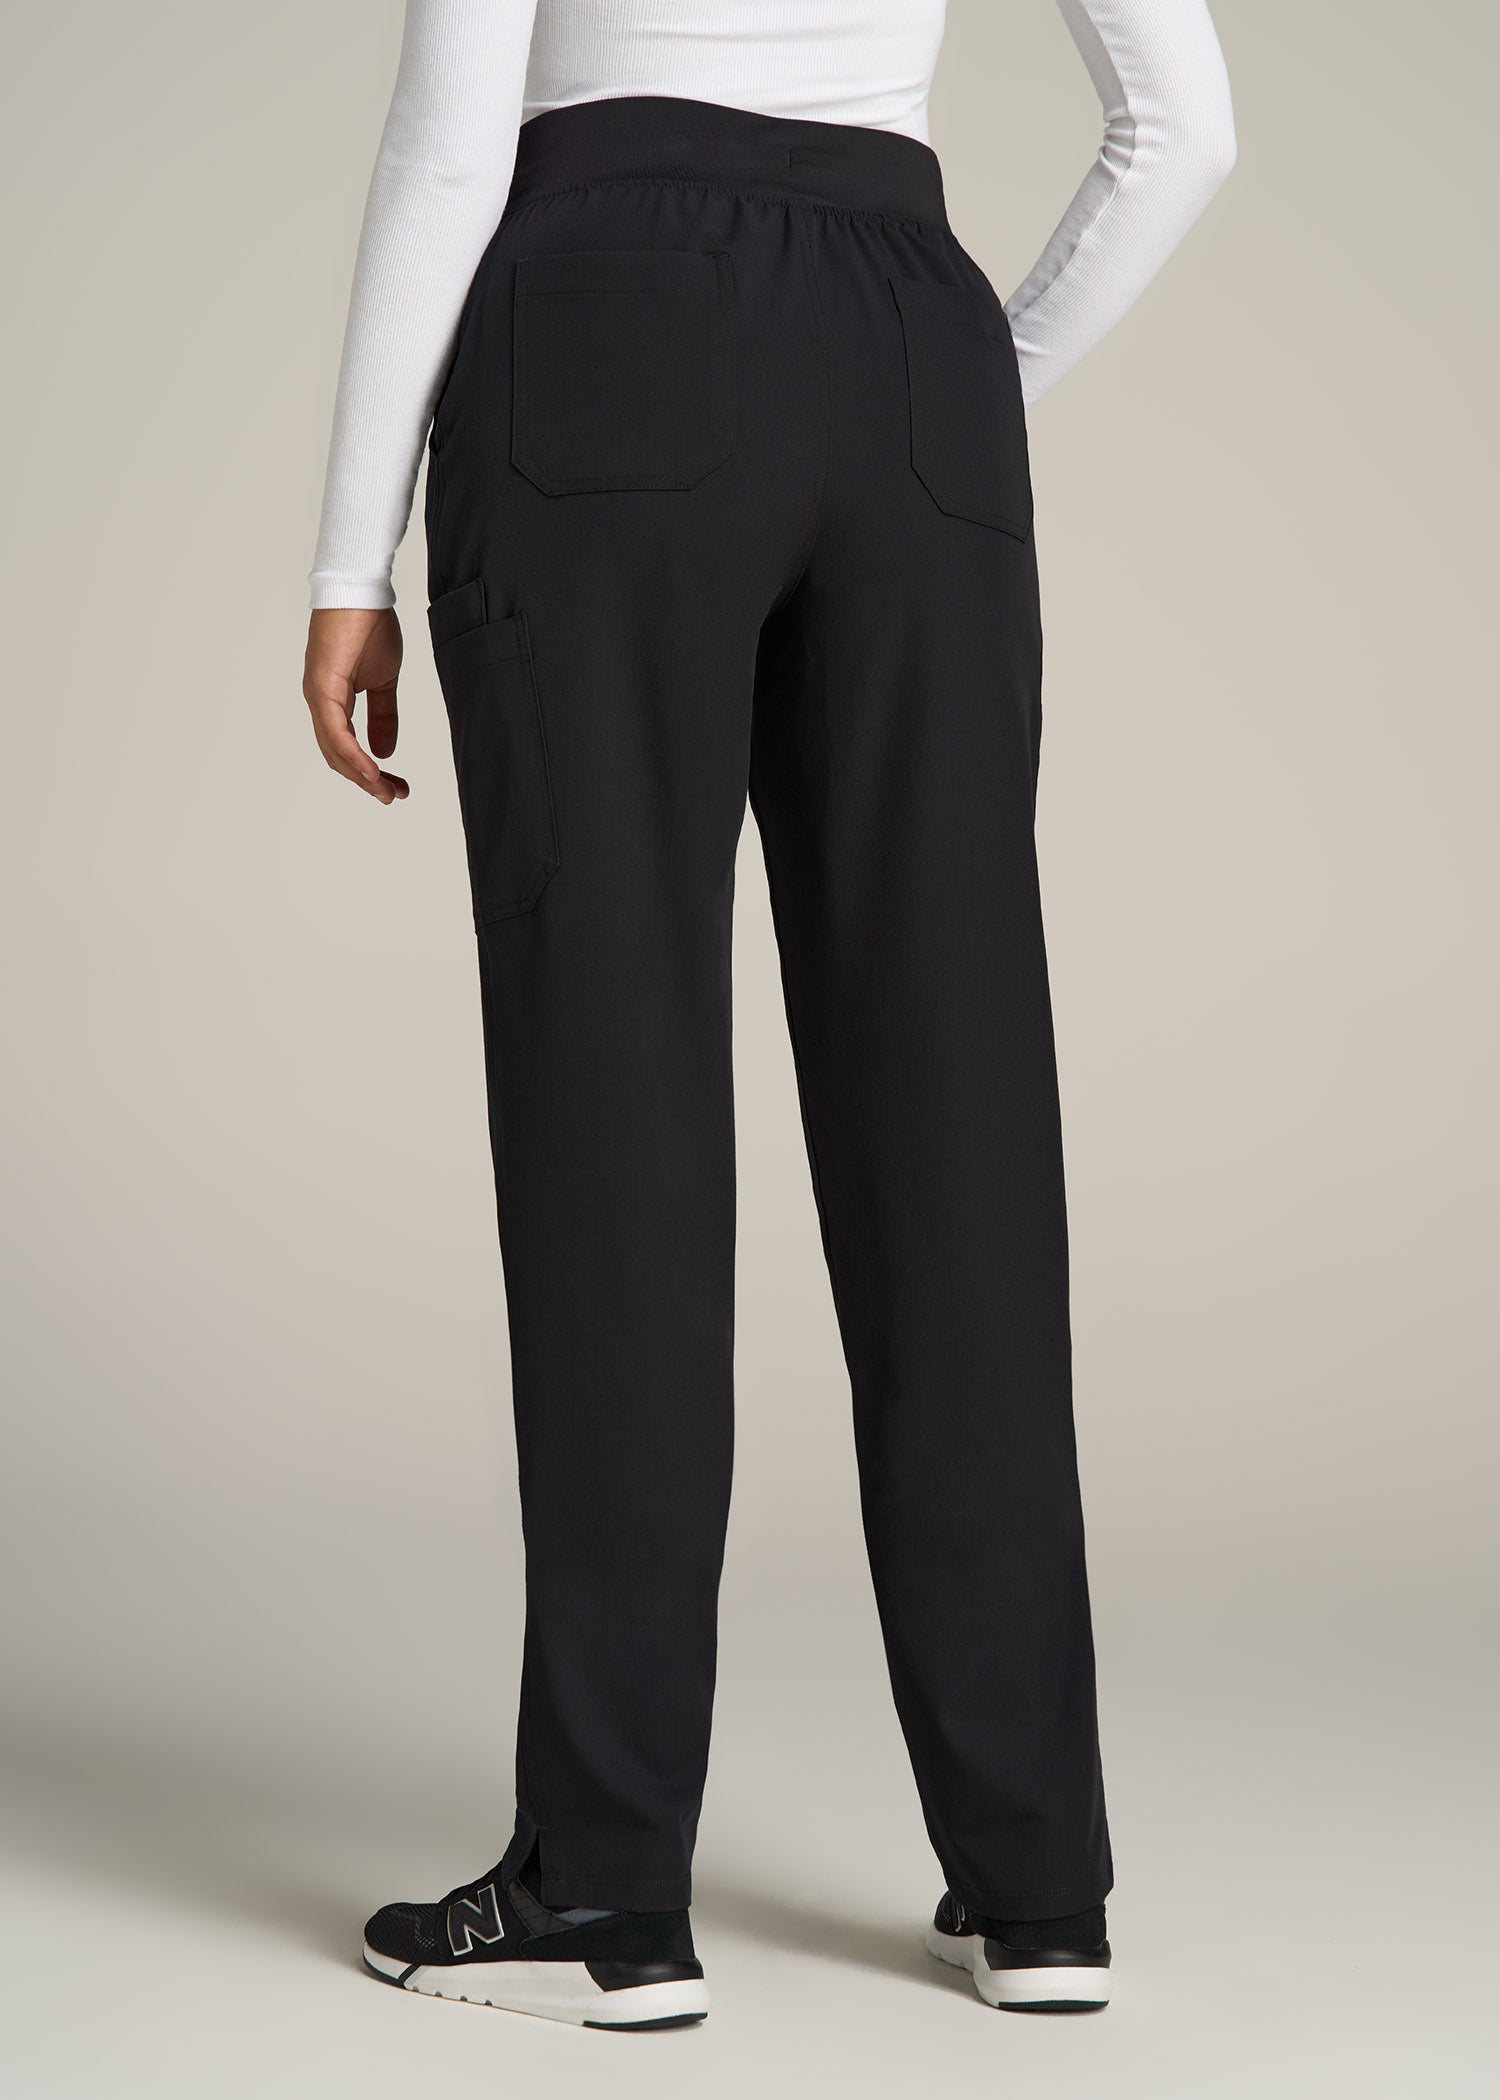 Tall Black Cargo Detail Casual Track Pant, Tall